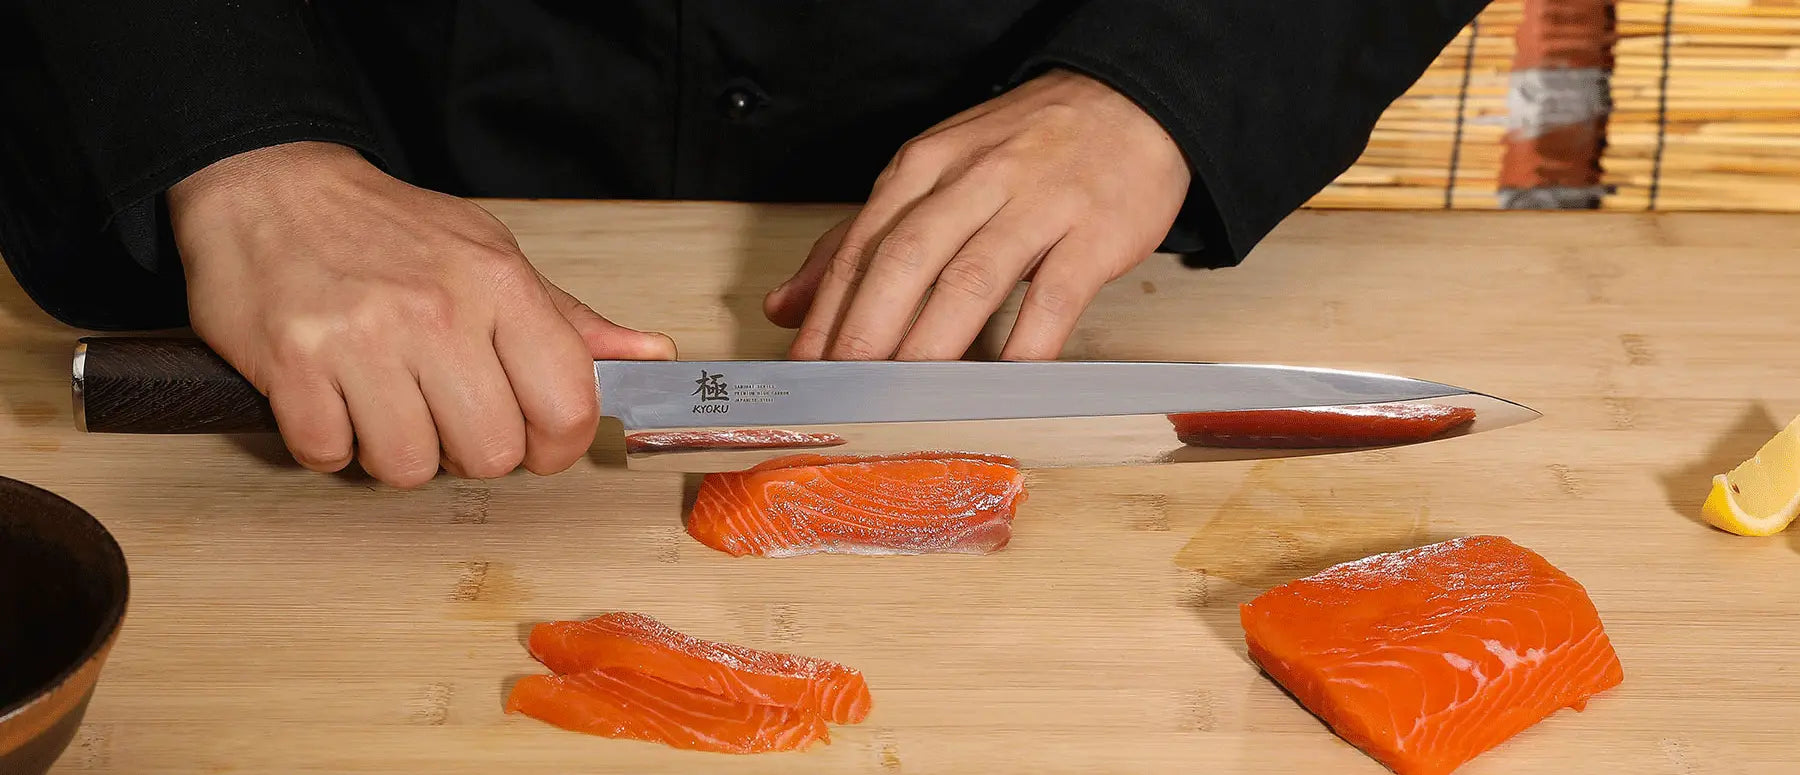 Sushi vs. Sashimi: What's the Difference?